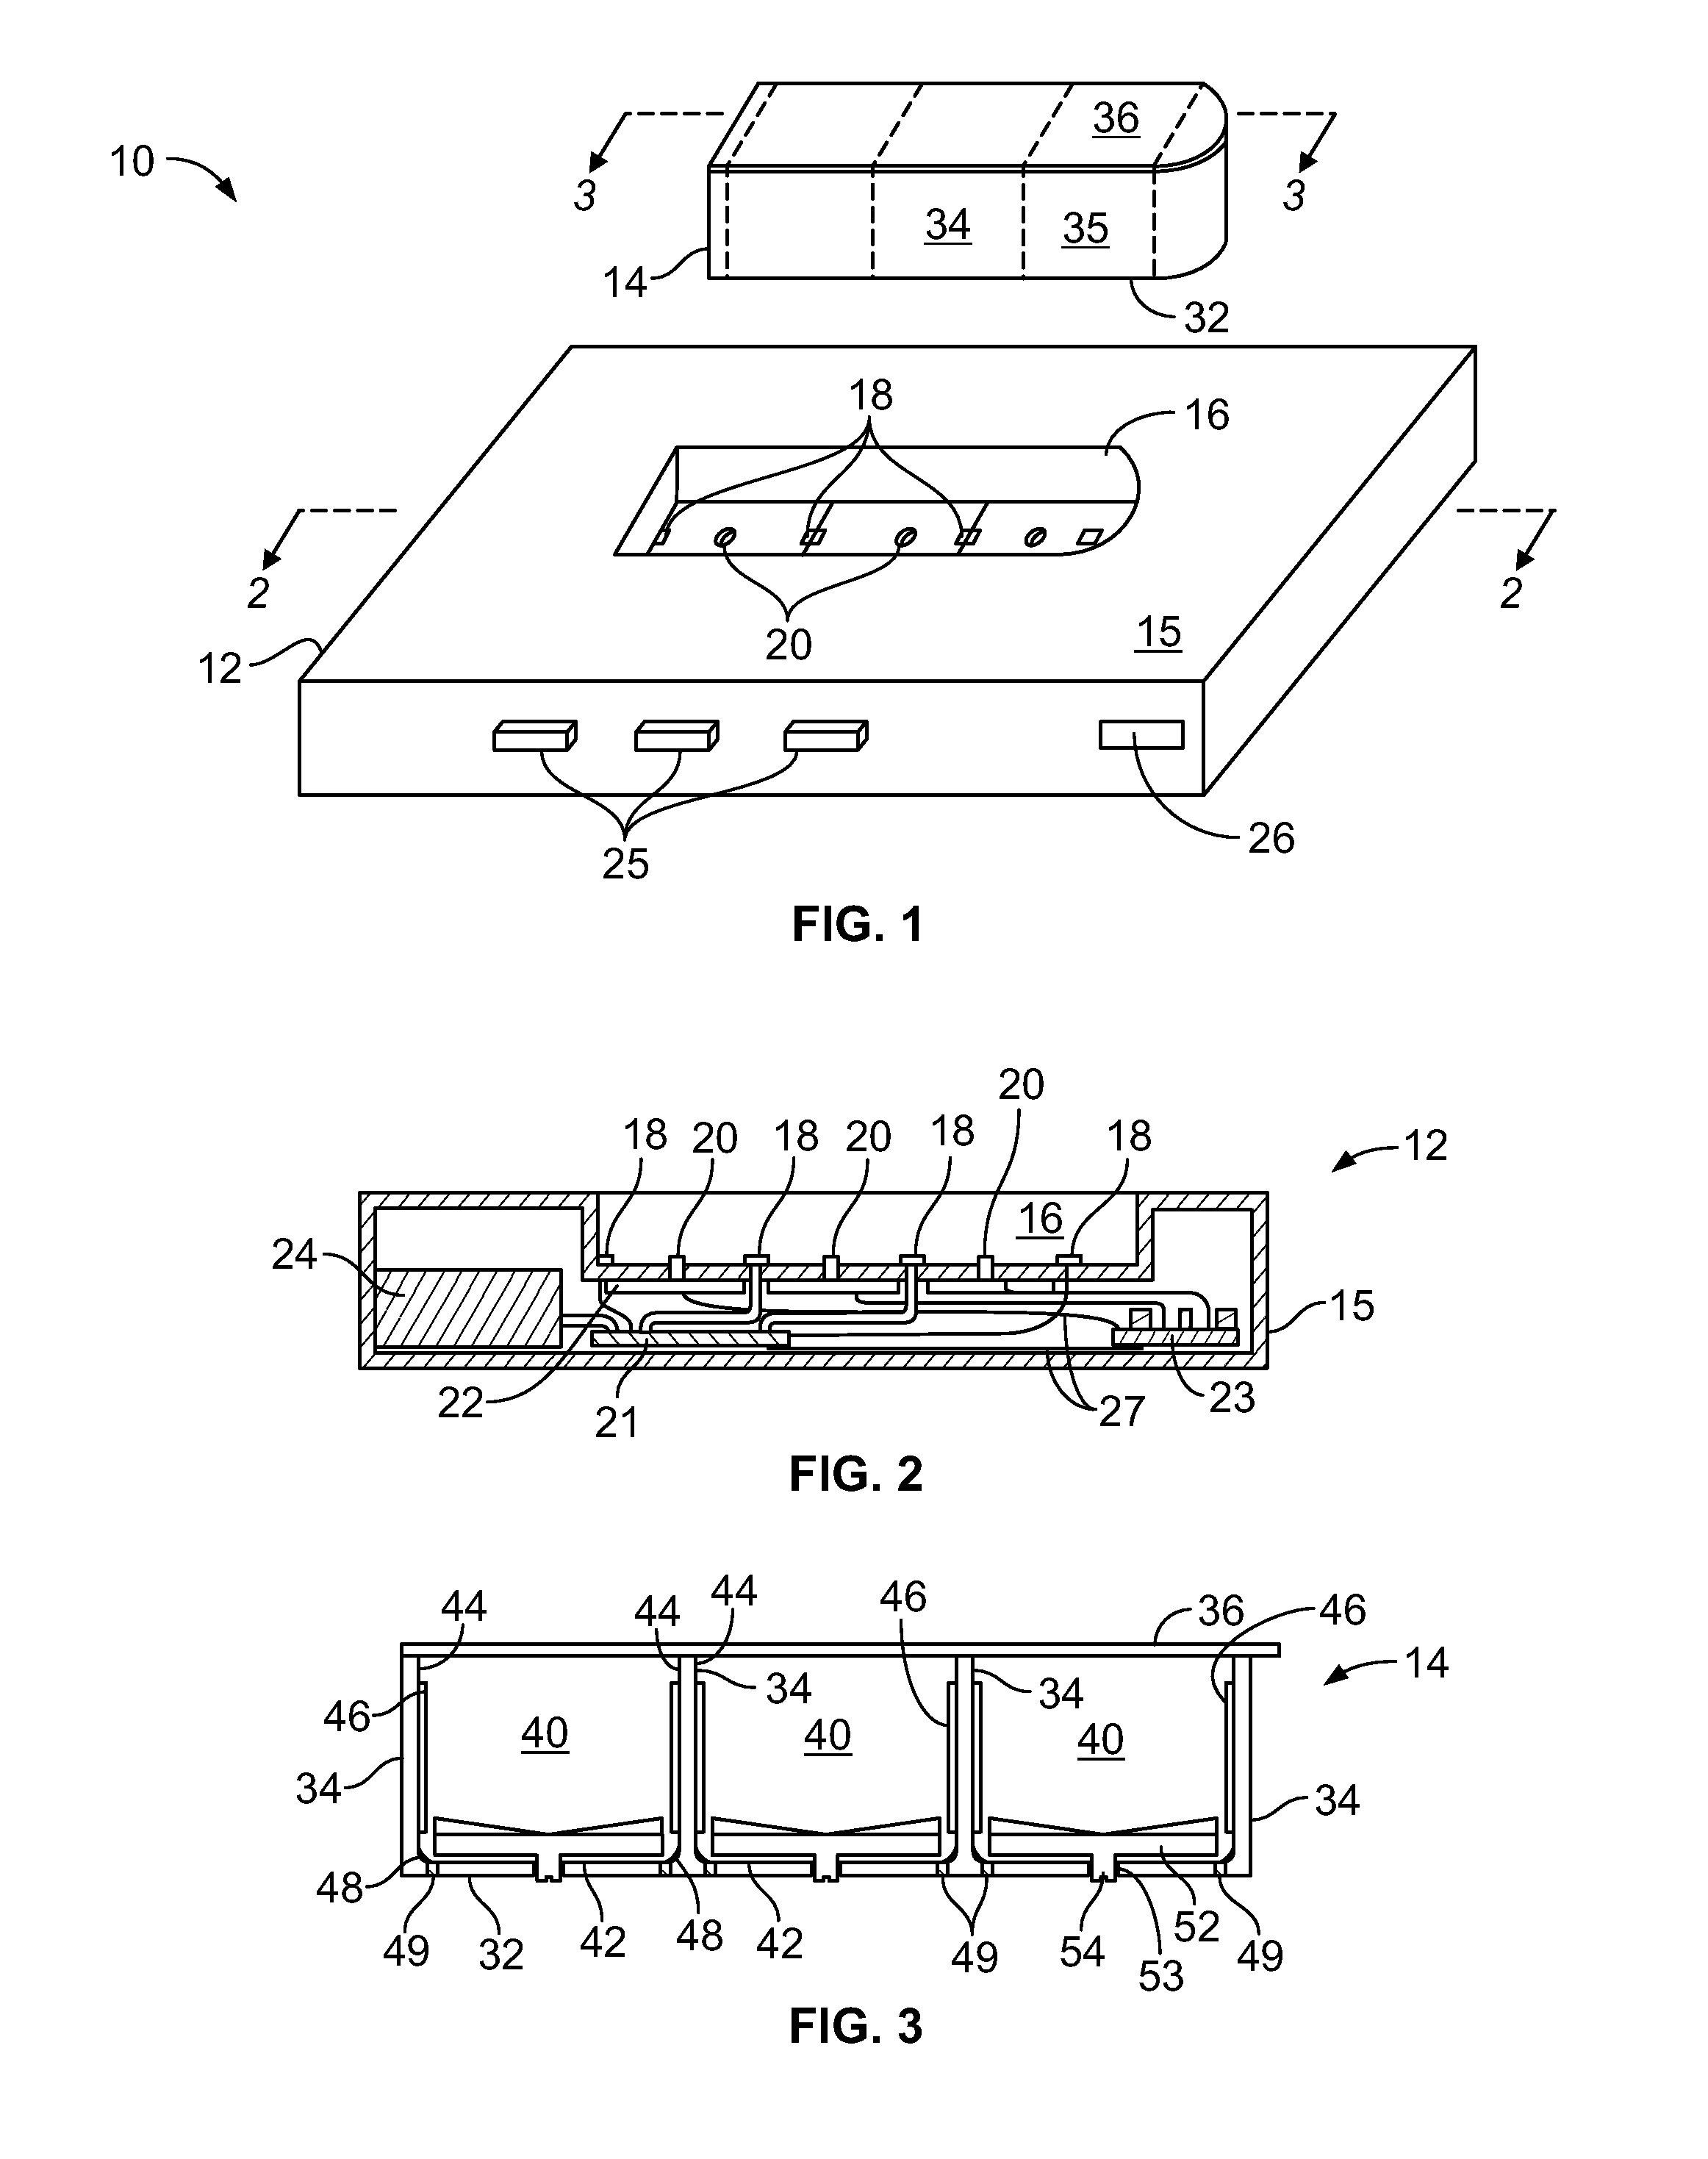 Antigen detection system and methods of use